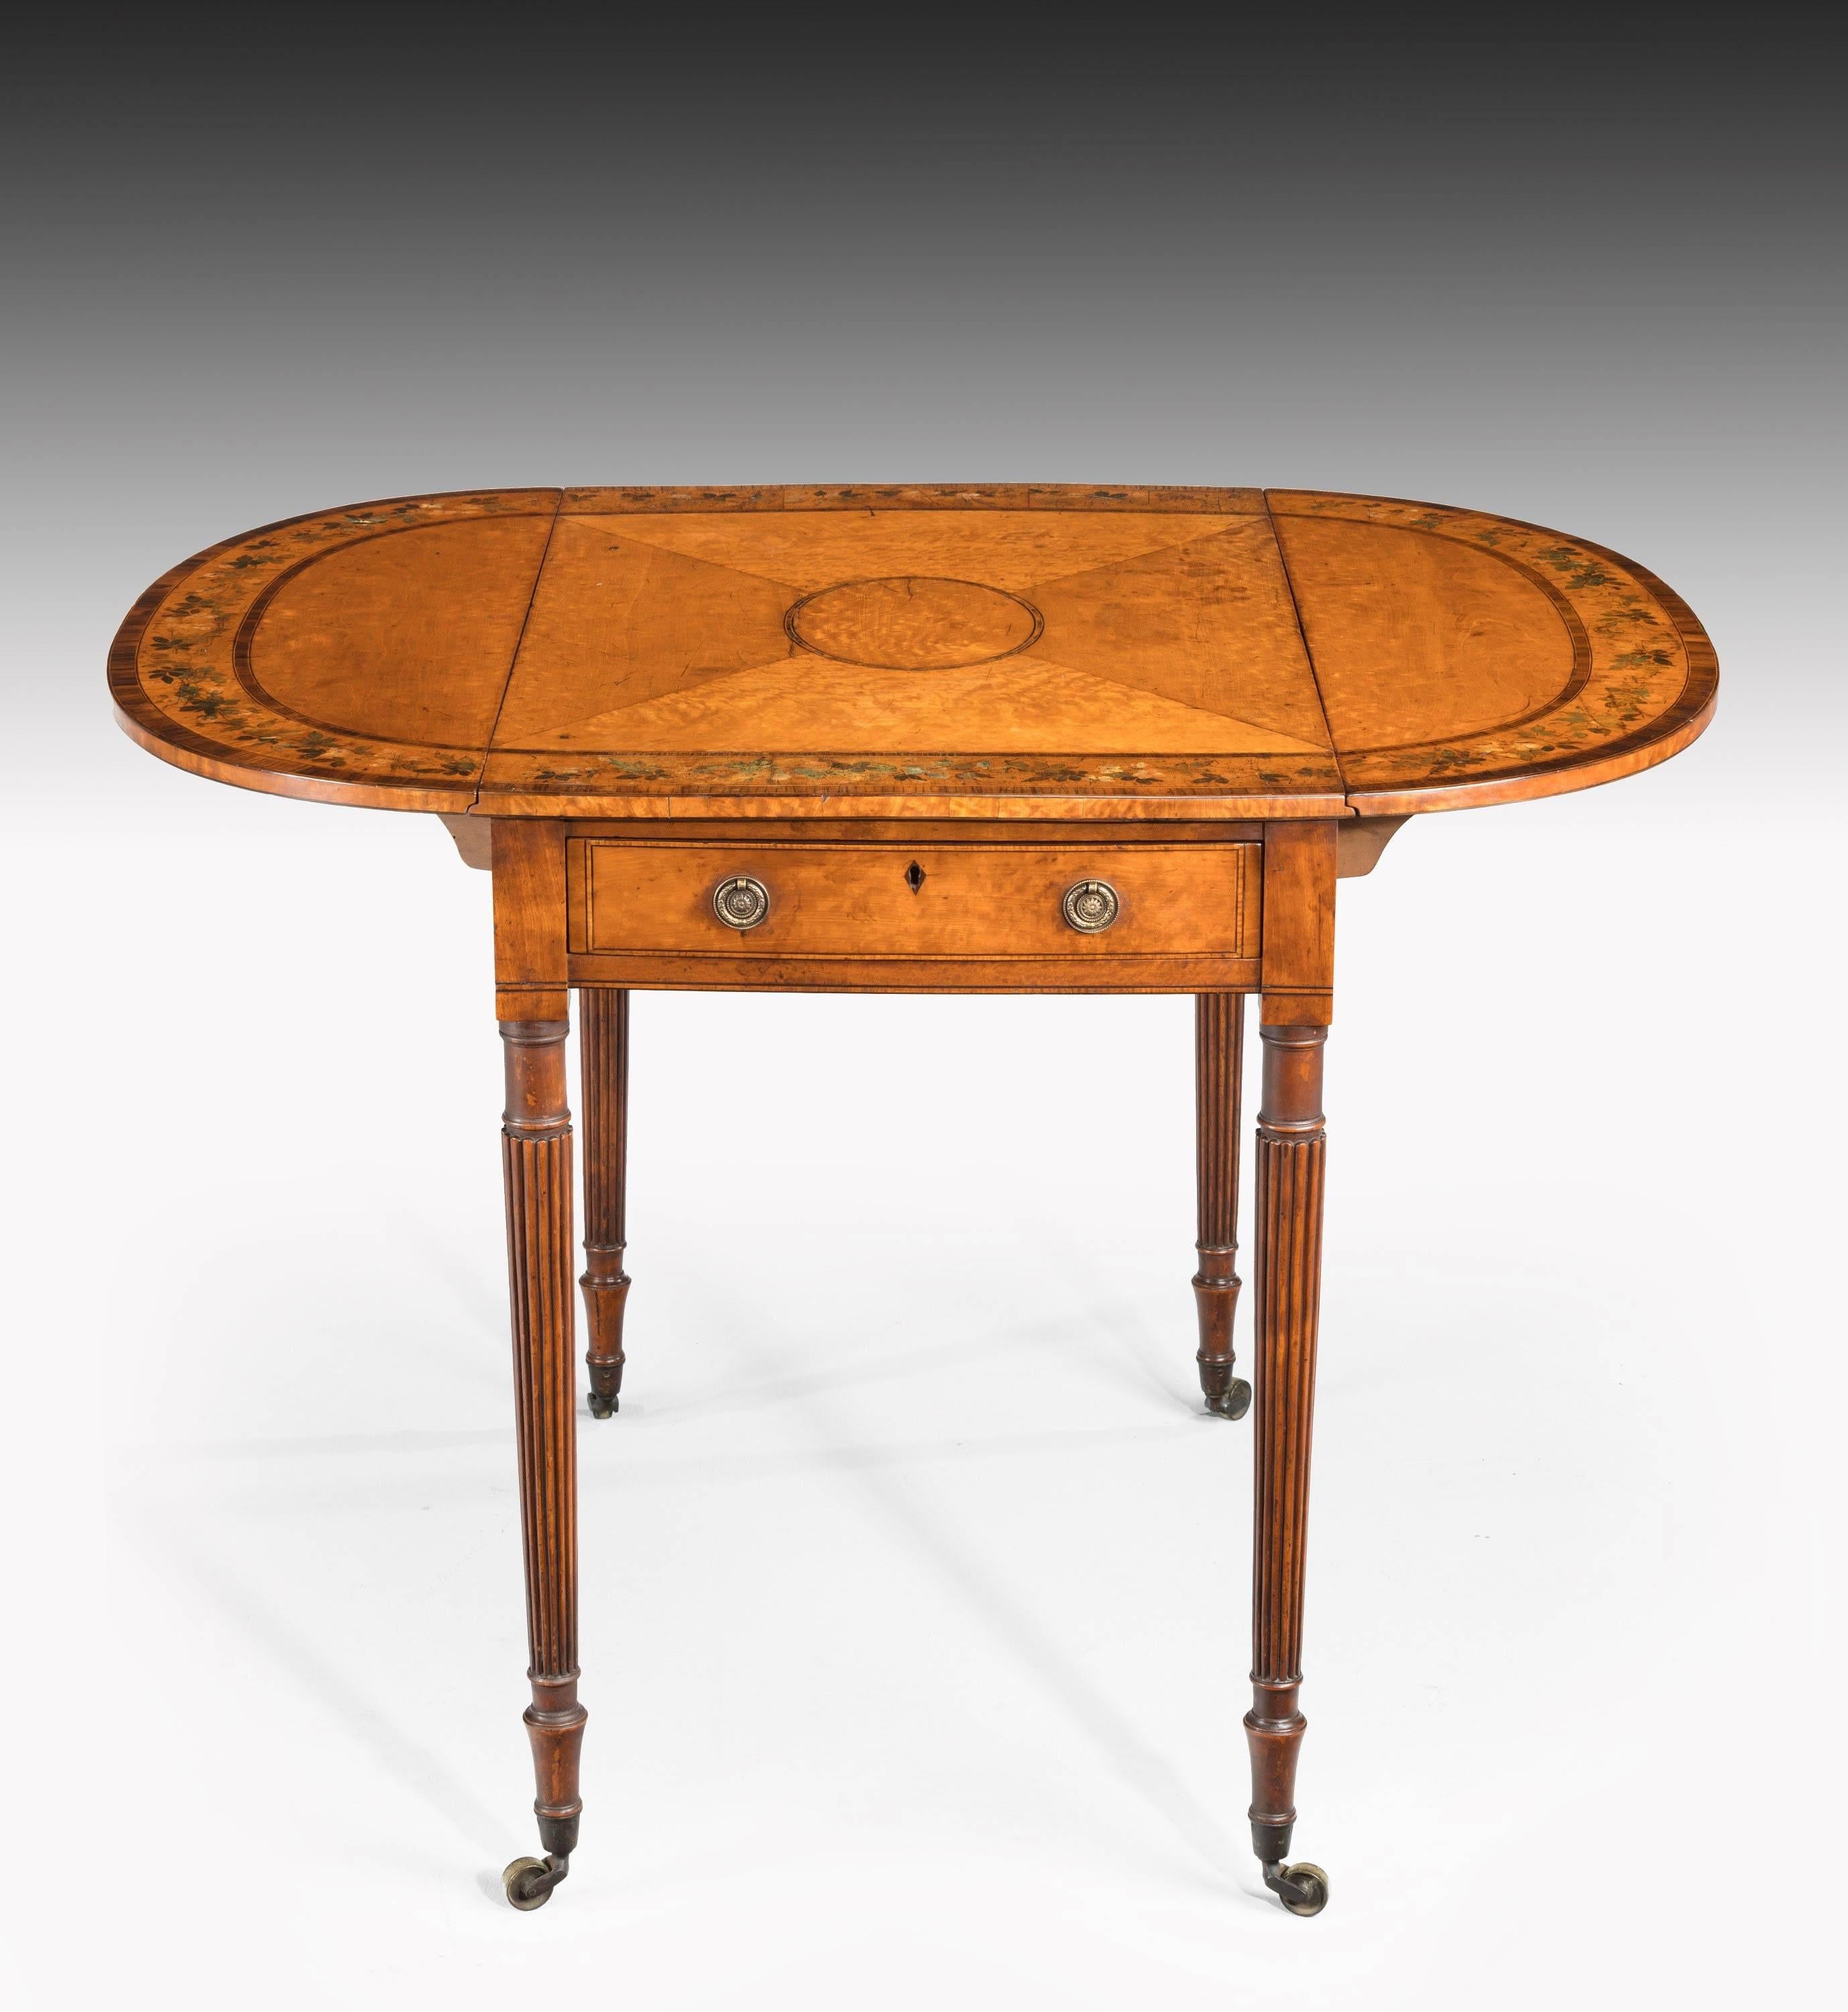 A small George III period satinwood Pembroke table. The top of quartered bookmatched timbers and oval contrasting section. Beautifully painted, broad crossbanded borders with flowers and foliage. Thin rosewood banded sections. Very finely carved